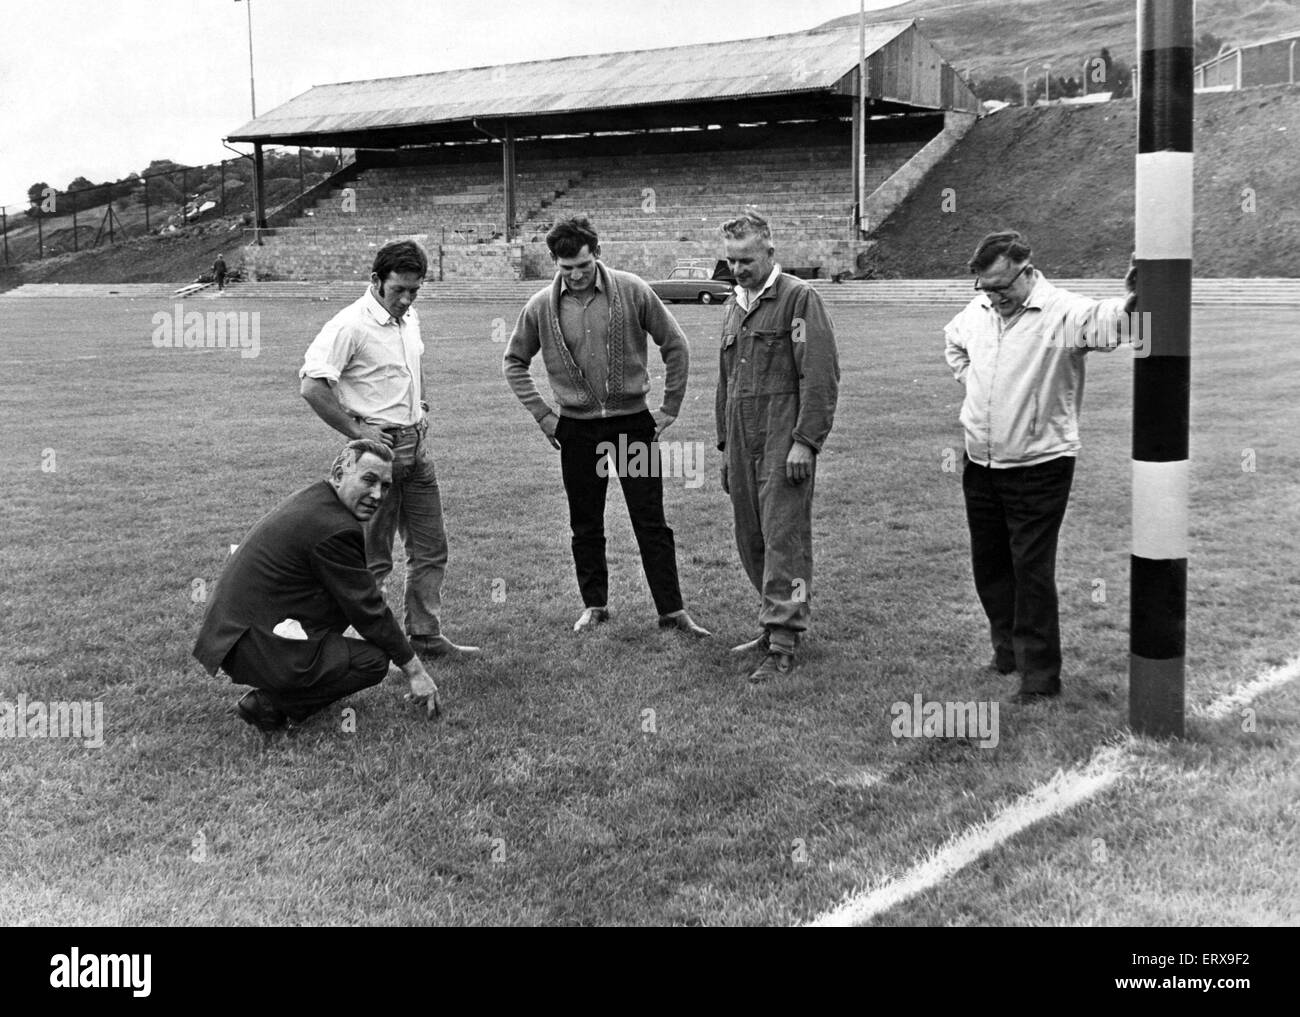 Members and players of the Penygraig Rugby Club pictured at their new ground which they have built on the site of the old Naval Colliery, Penygraig. L-R Mr Gwyn Dackins, Stuart Smith, Glyn Owen, Syd Anthony and Mel Harcombe. 1st September 1970. Stock Photo